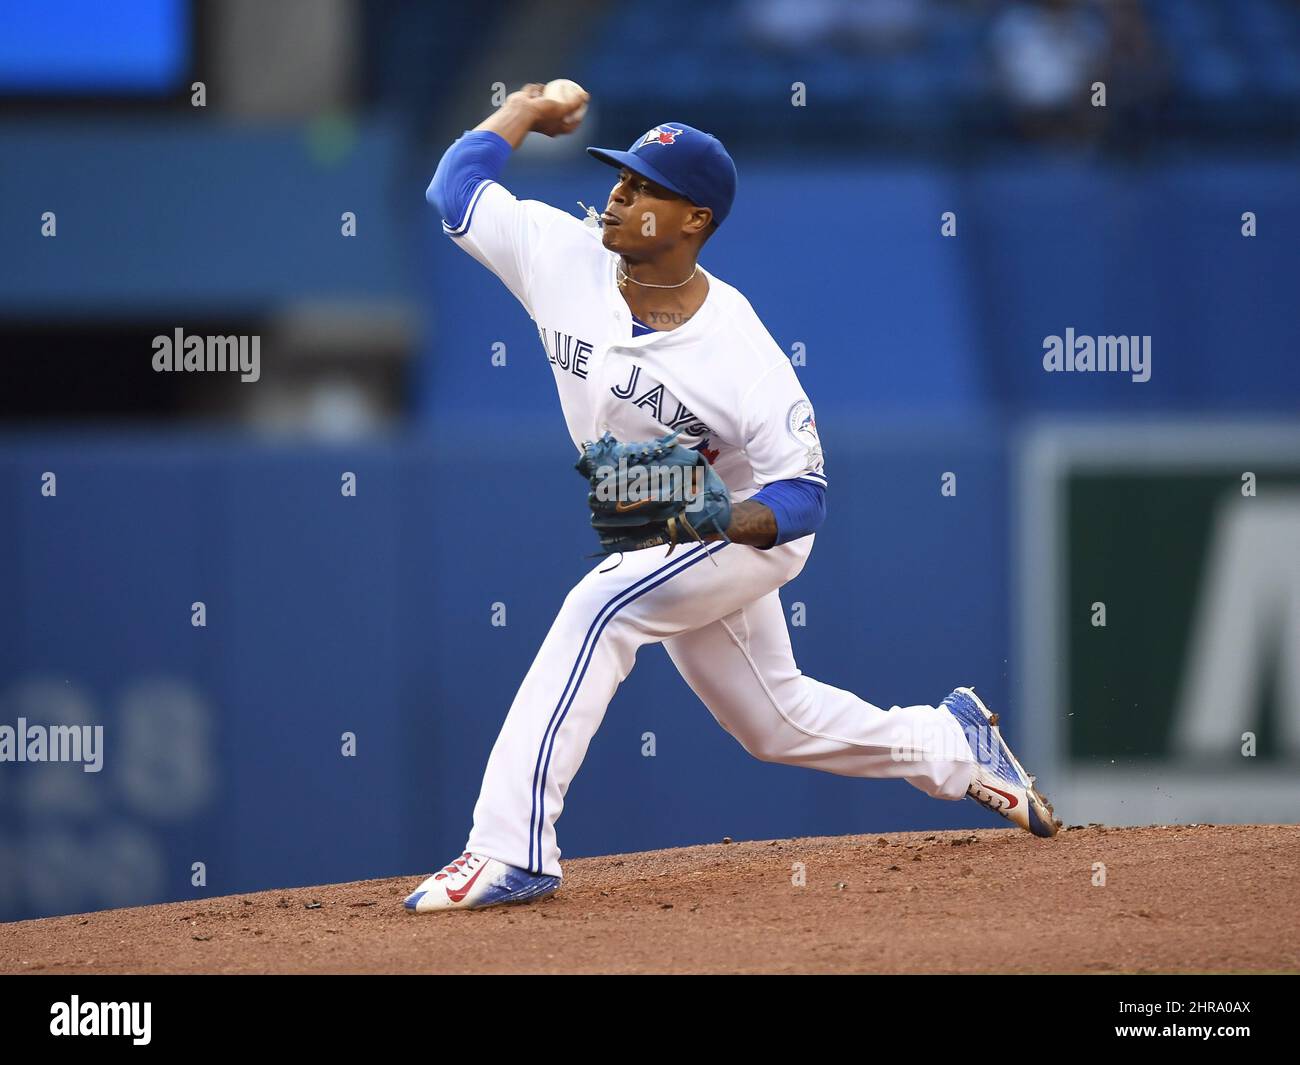 Toronto Blue Jays' starting pitcher Marcus Stroman throws against the San Diego Padres during first inning MLB interleague baseball action, in Toronto on Tuesday, July 26, 2016. THE CANADIAN PRESS/Frank Gunn Stock Photo